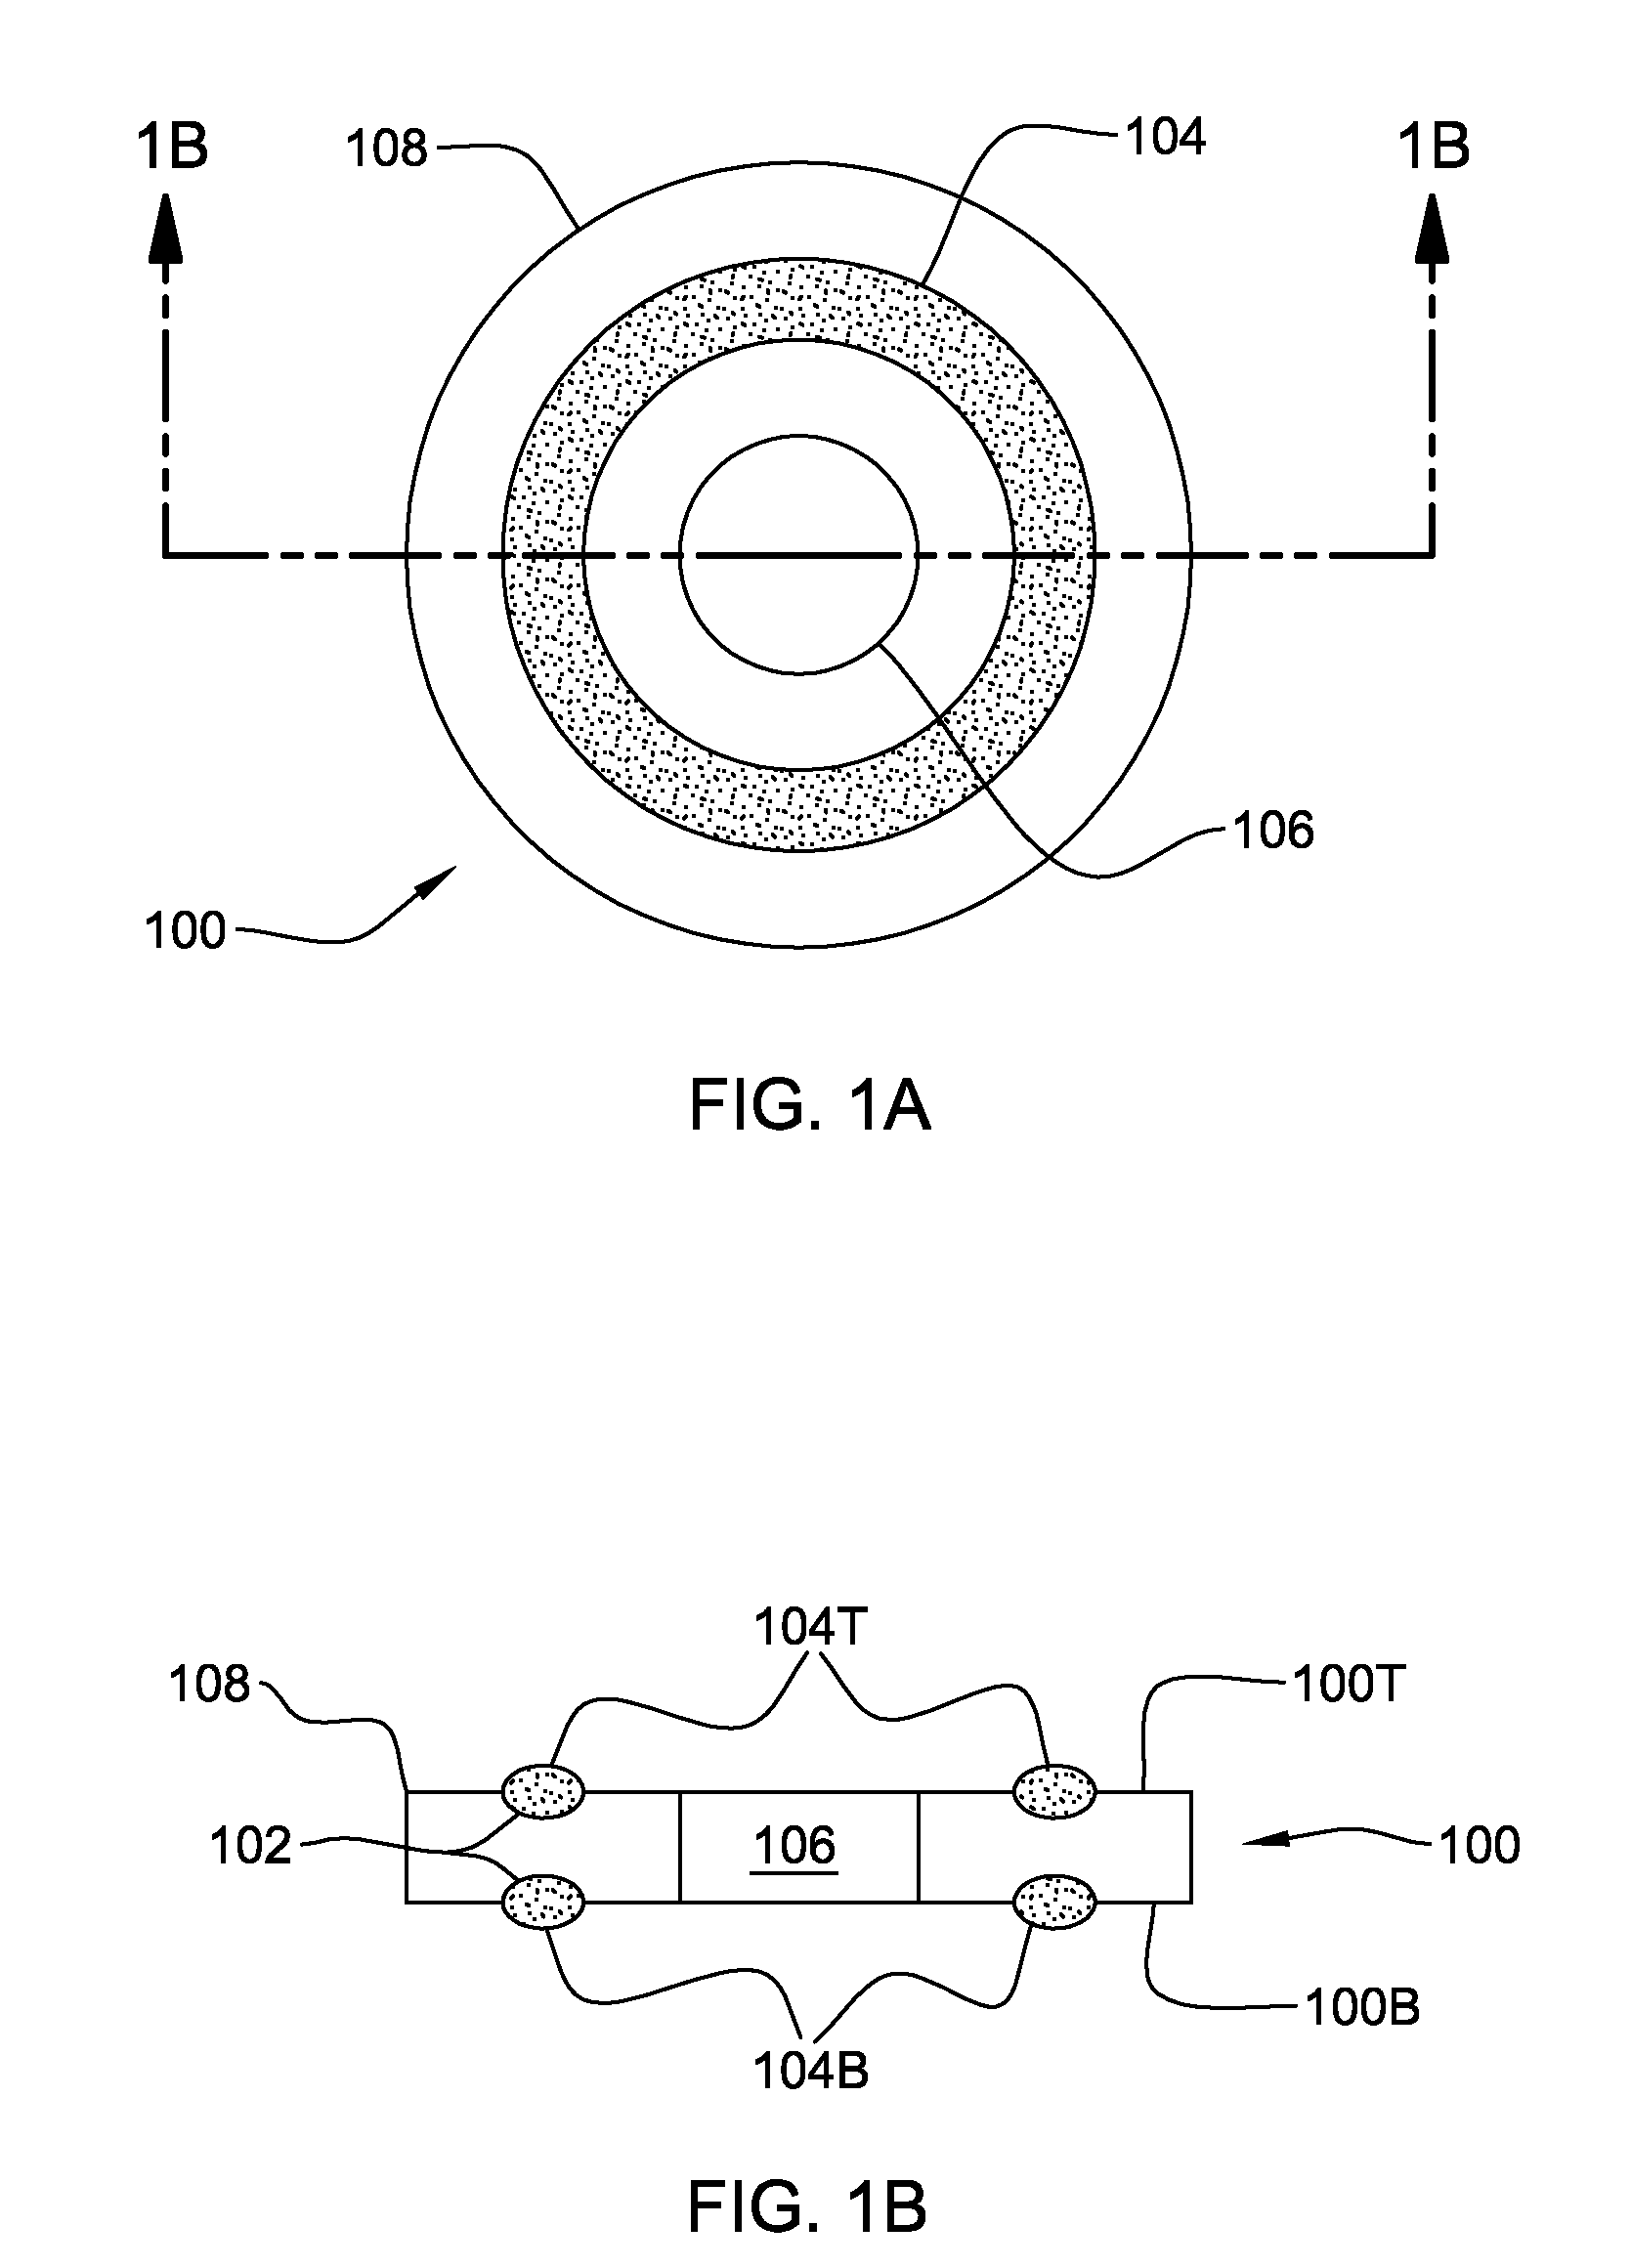 Fastening assembly including washer for sealing the assembly for lightning strike protection in composite structures